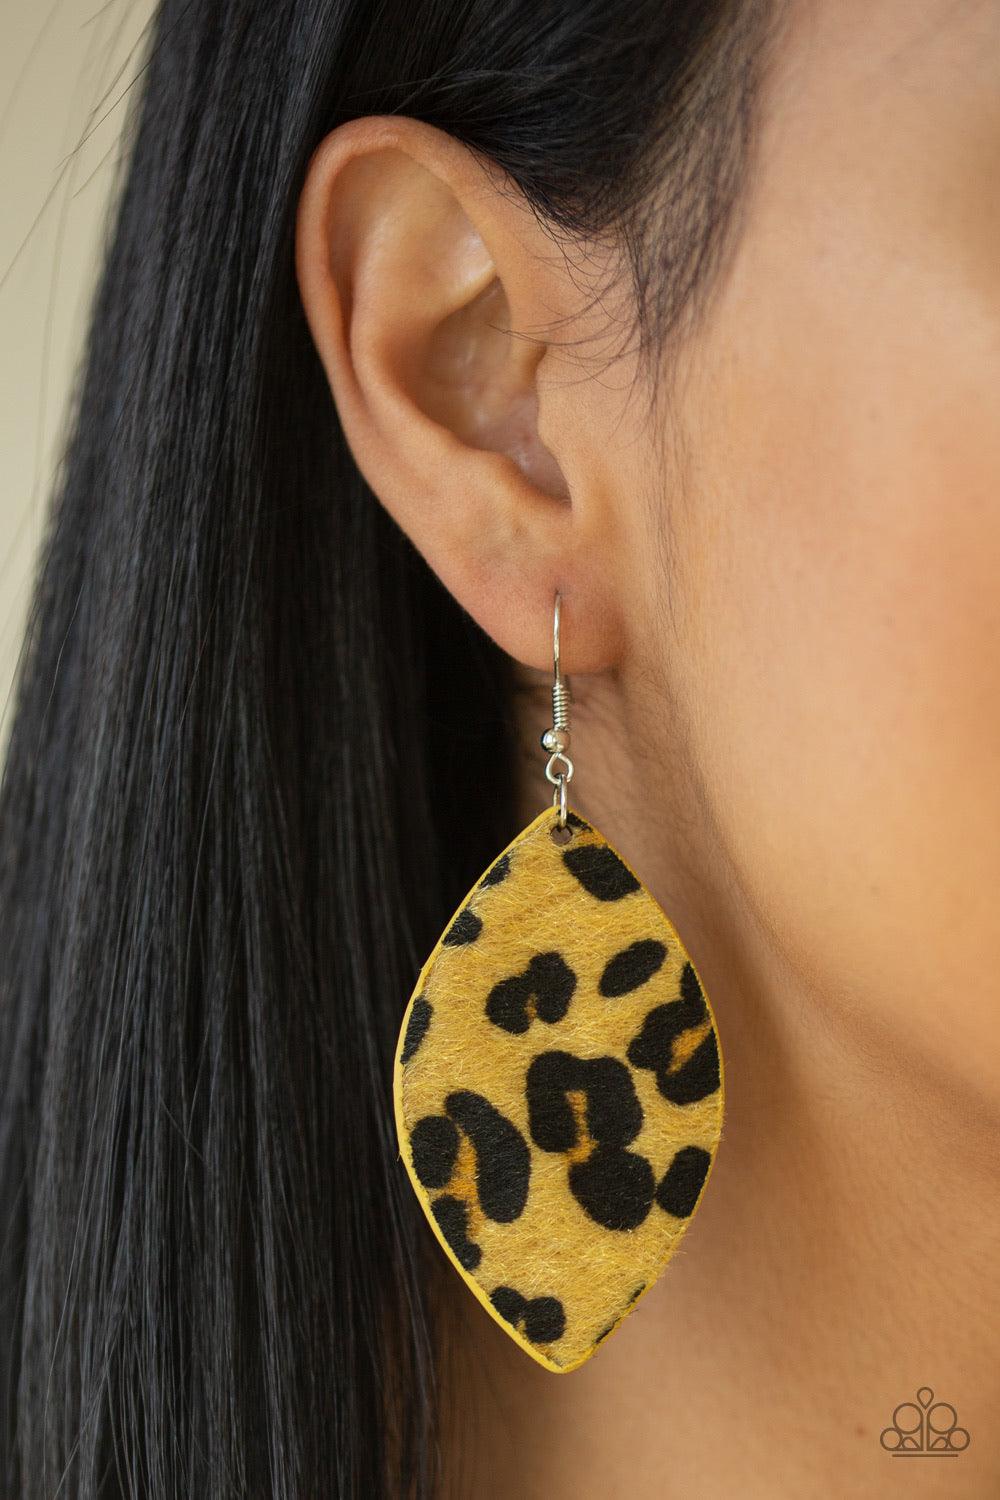 Paparazzi Accessories GRR-irl Power! - Yellow Featuring black cheetah print, a fuzzy yellow almond-shaped frame swings from the ear for a wild look. Earring attaches to a standard fishhook fitting. Jewelry